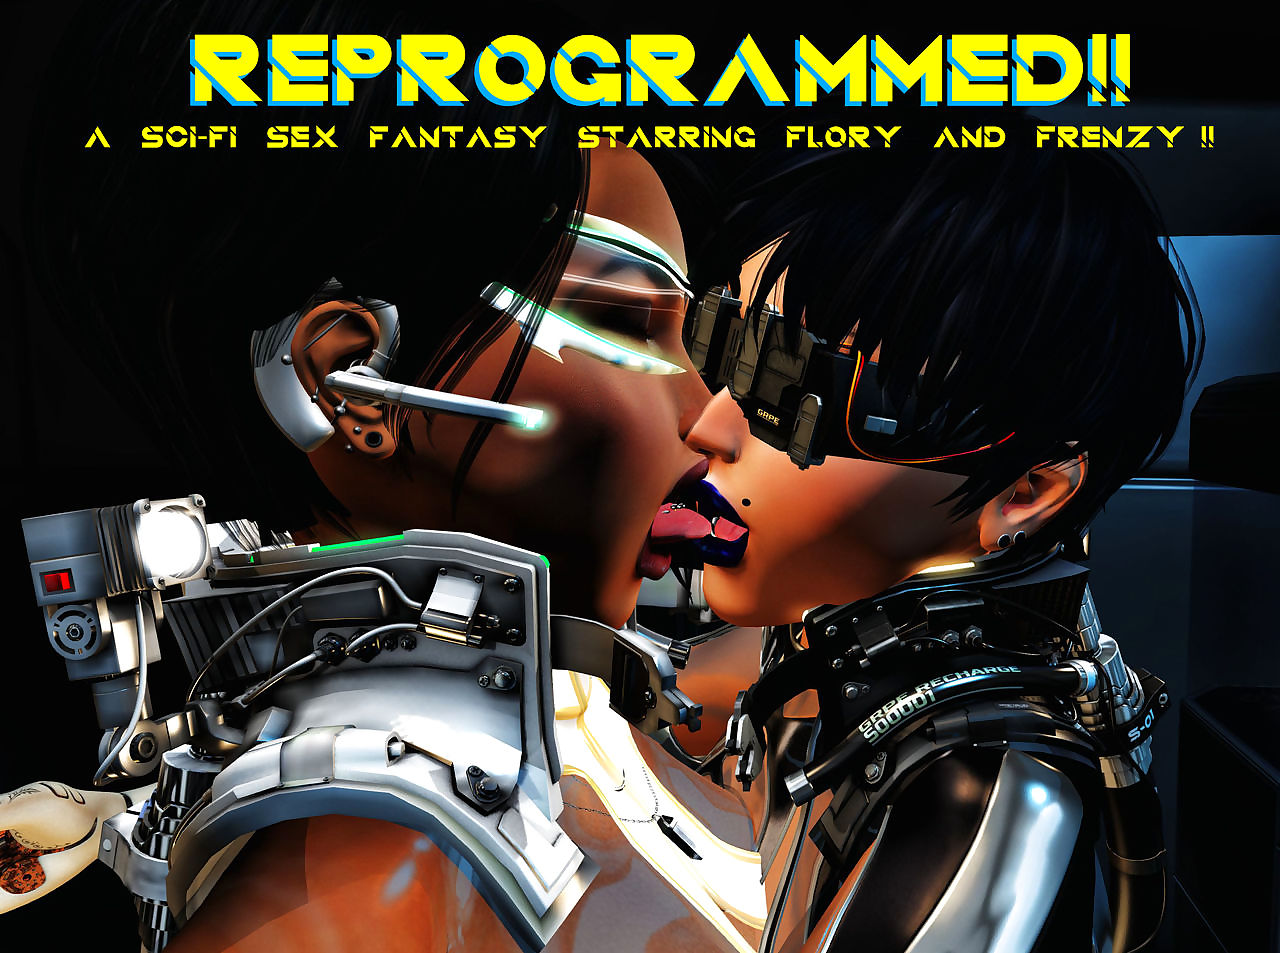 Frenzy in SL- Reprogrammed! page 1